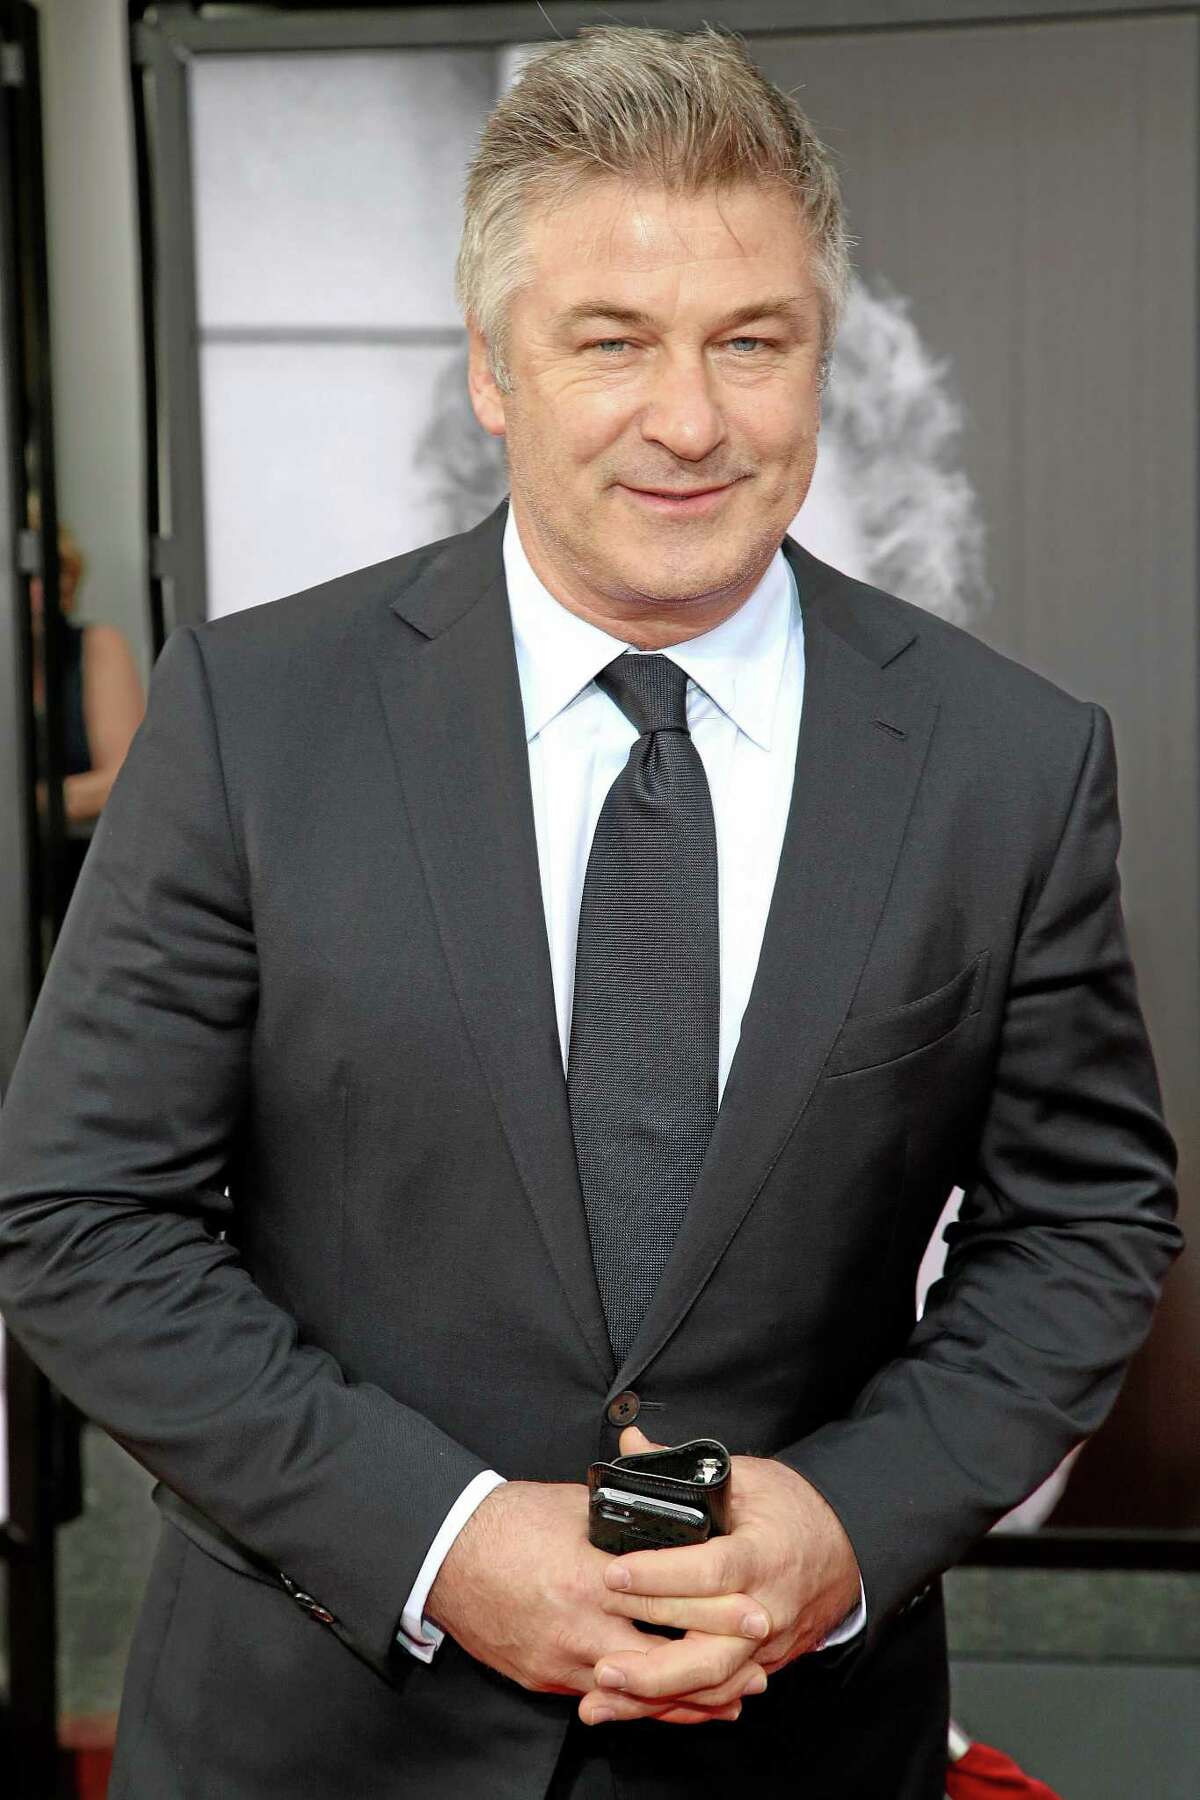 This April 10, 2014, file photo shows actor Alec Baldwin at the 2014 TCM Classic Film Festival’s Opening Night Gala in Los Angeles. Police in New York City say actor Alec Baldwin has been arrested for riding a bike the wrong way on the street and acting belligerently toward the arresting officers.